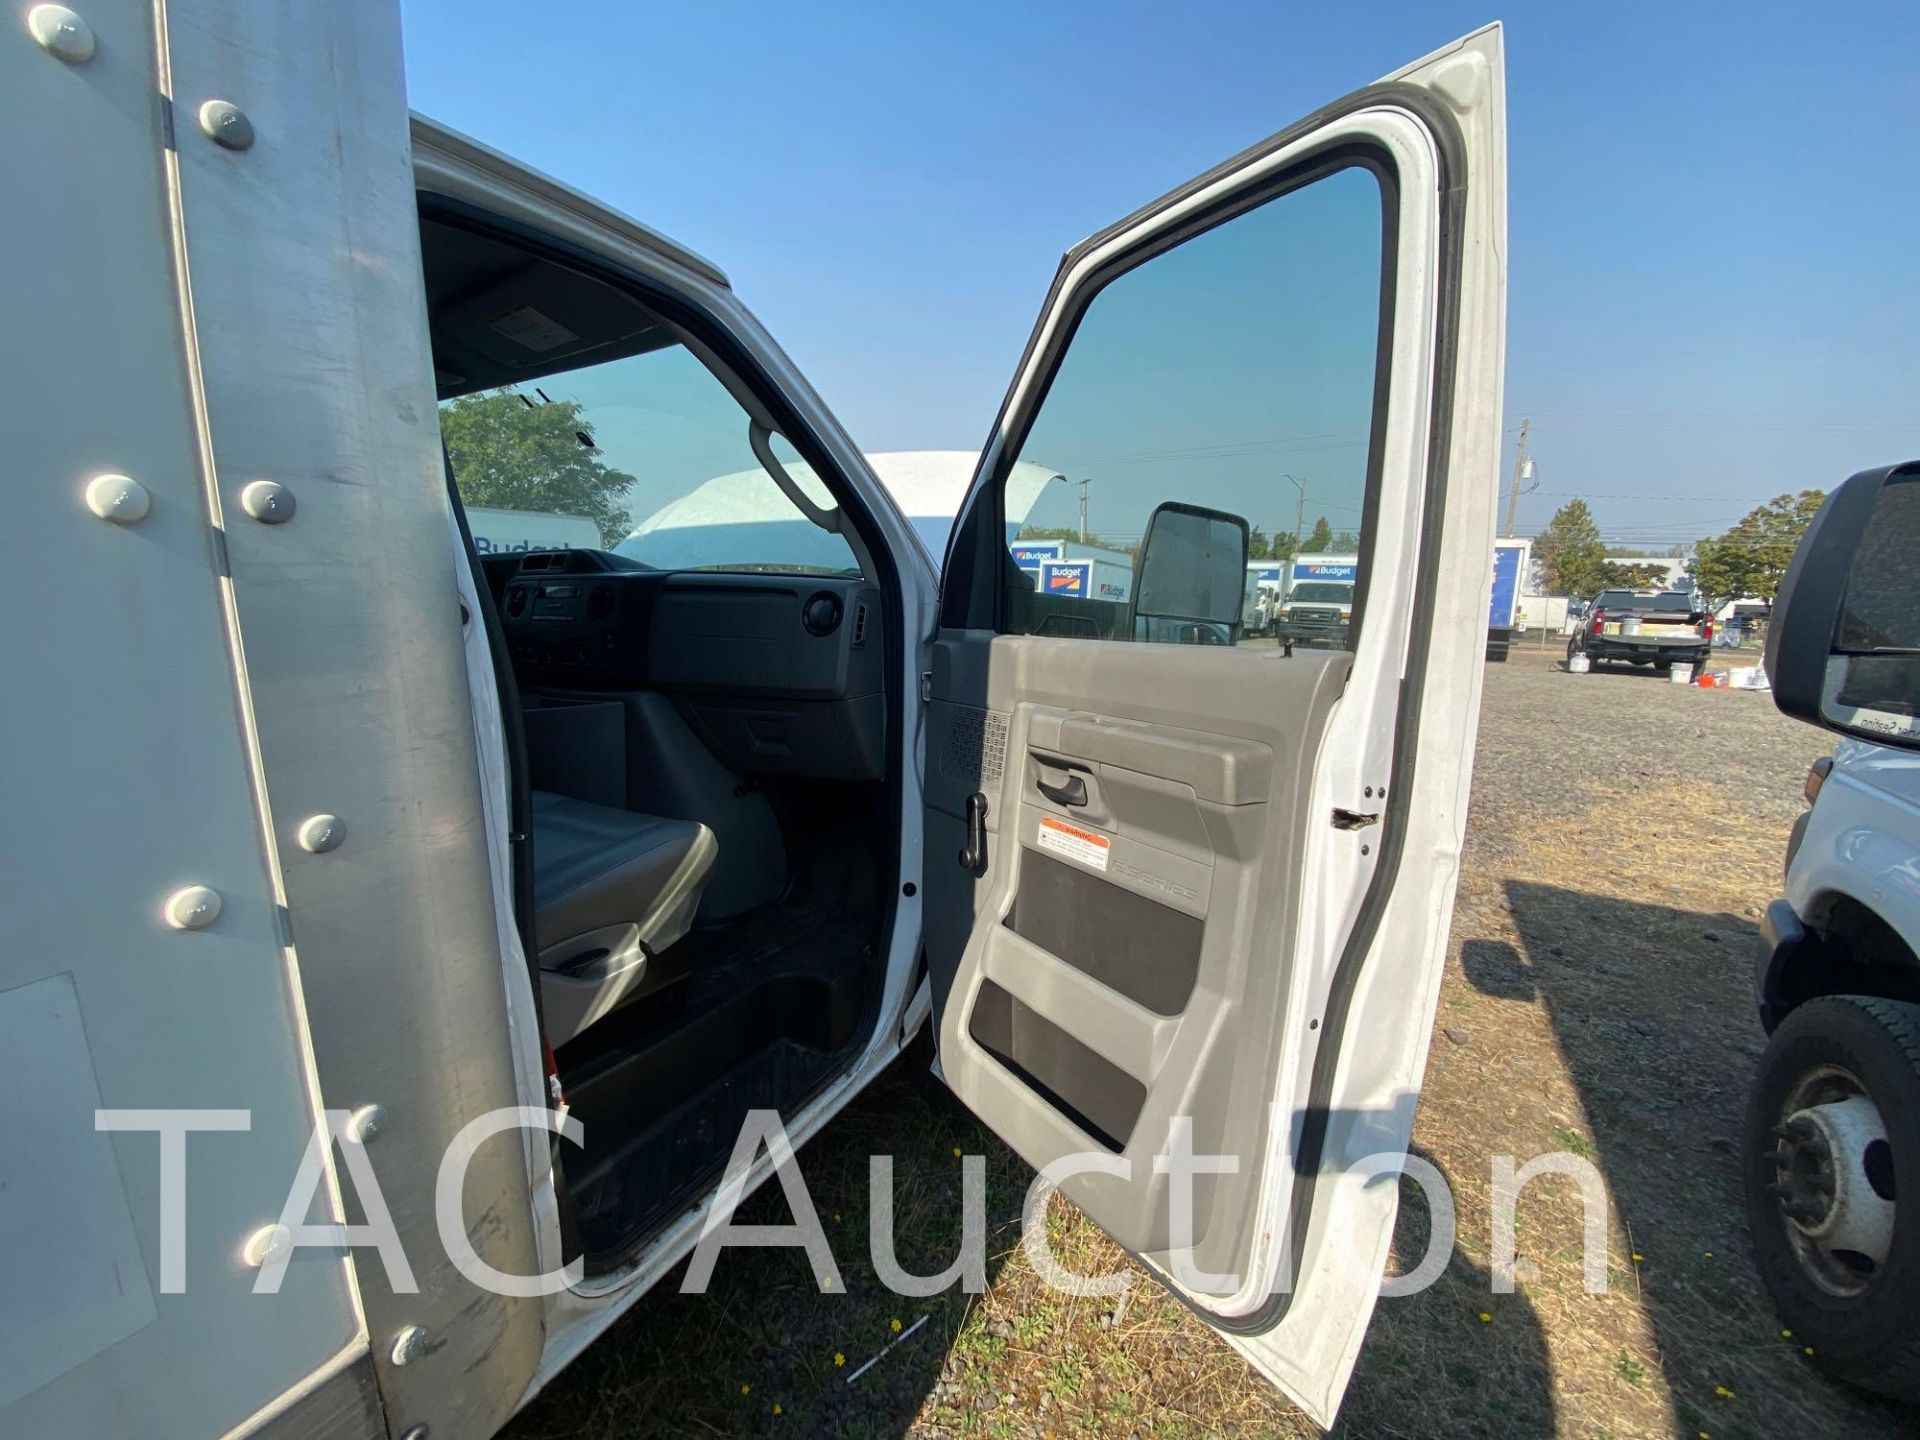 2015 Ford E-350 16ft Box Truck - Image 53 of 106